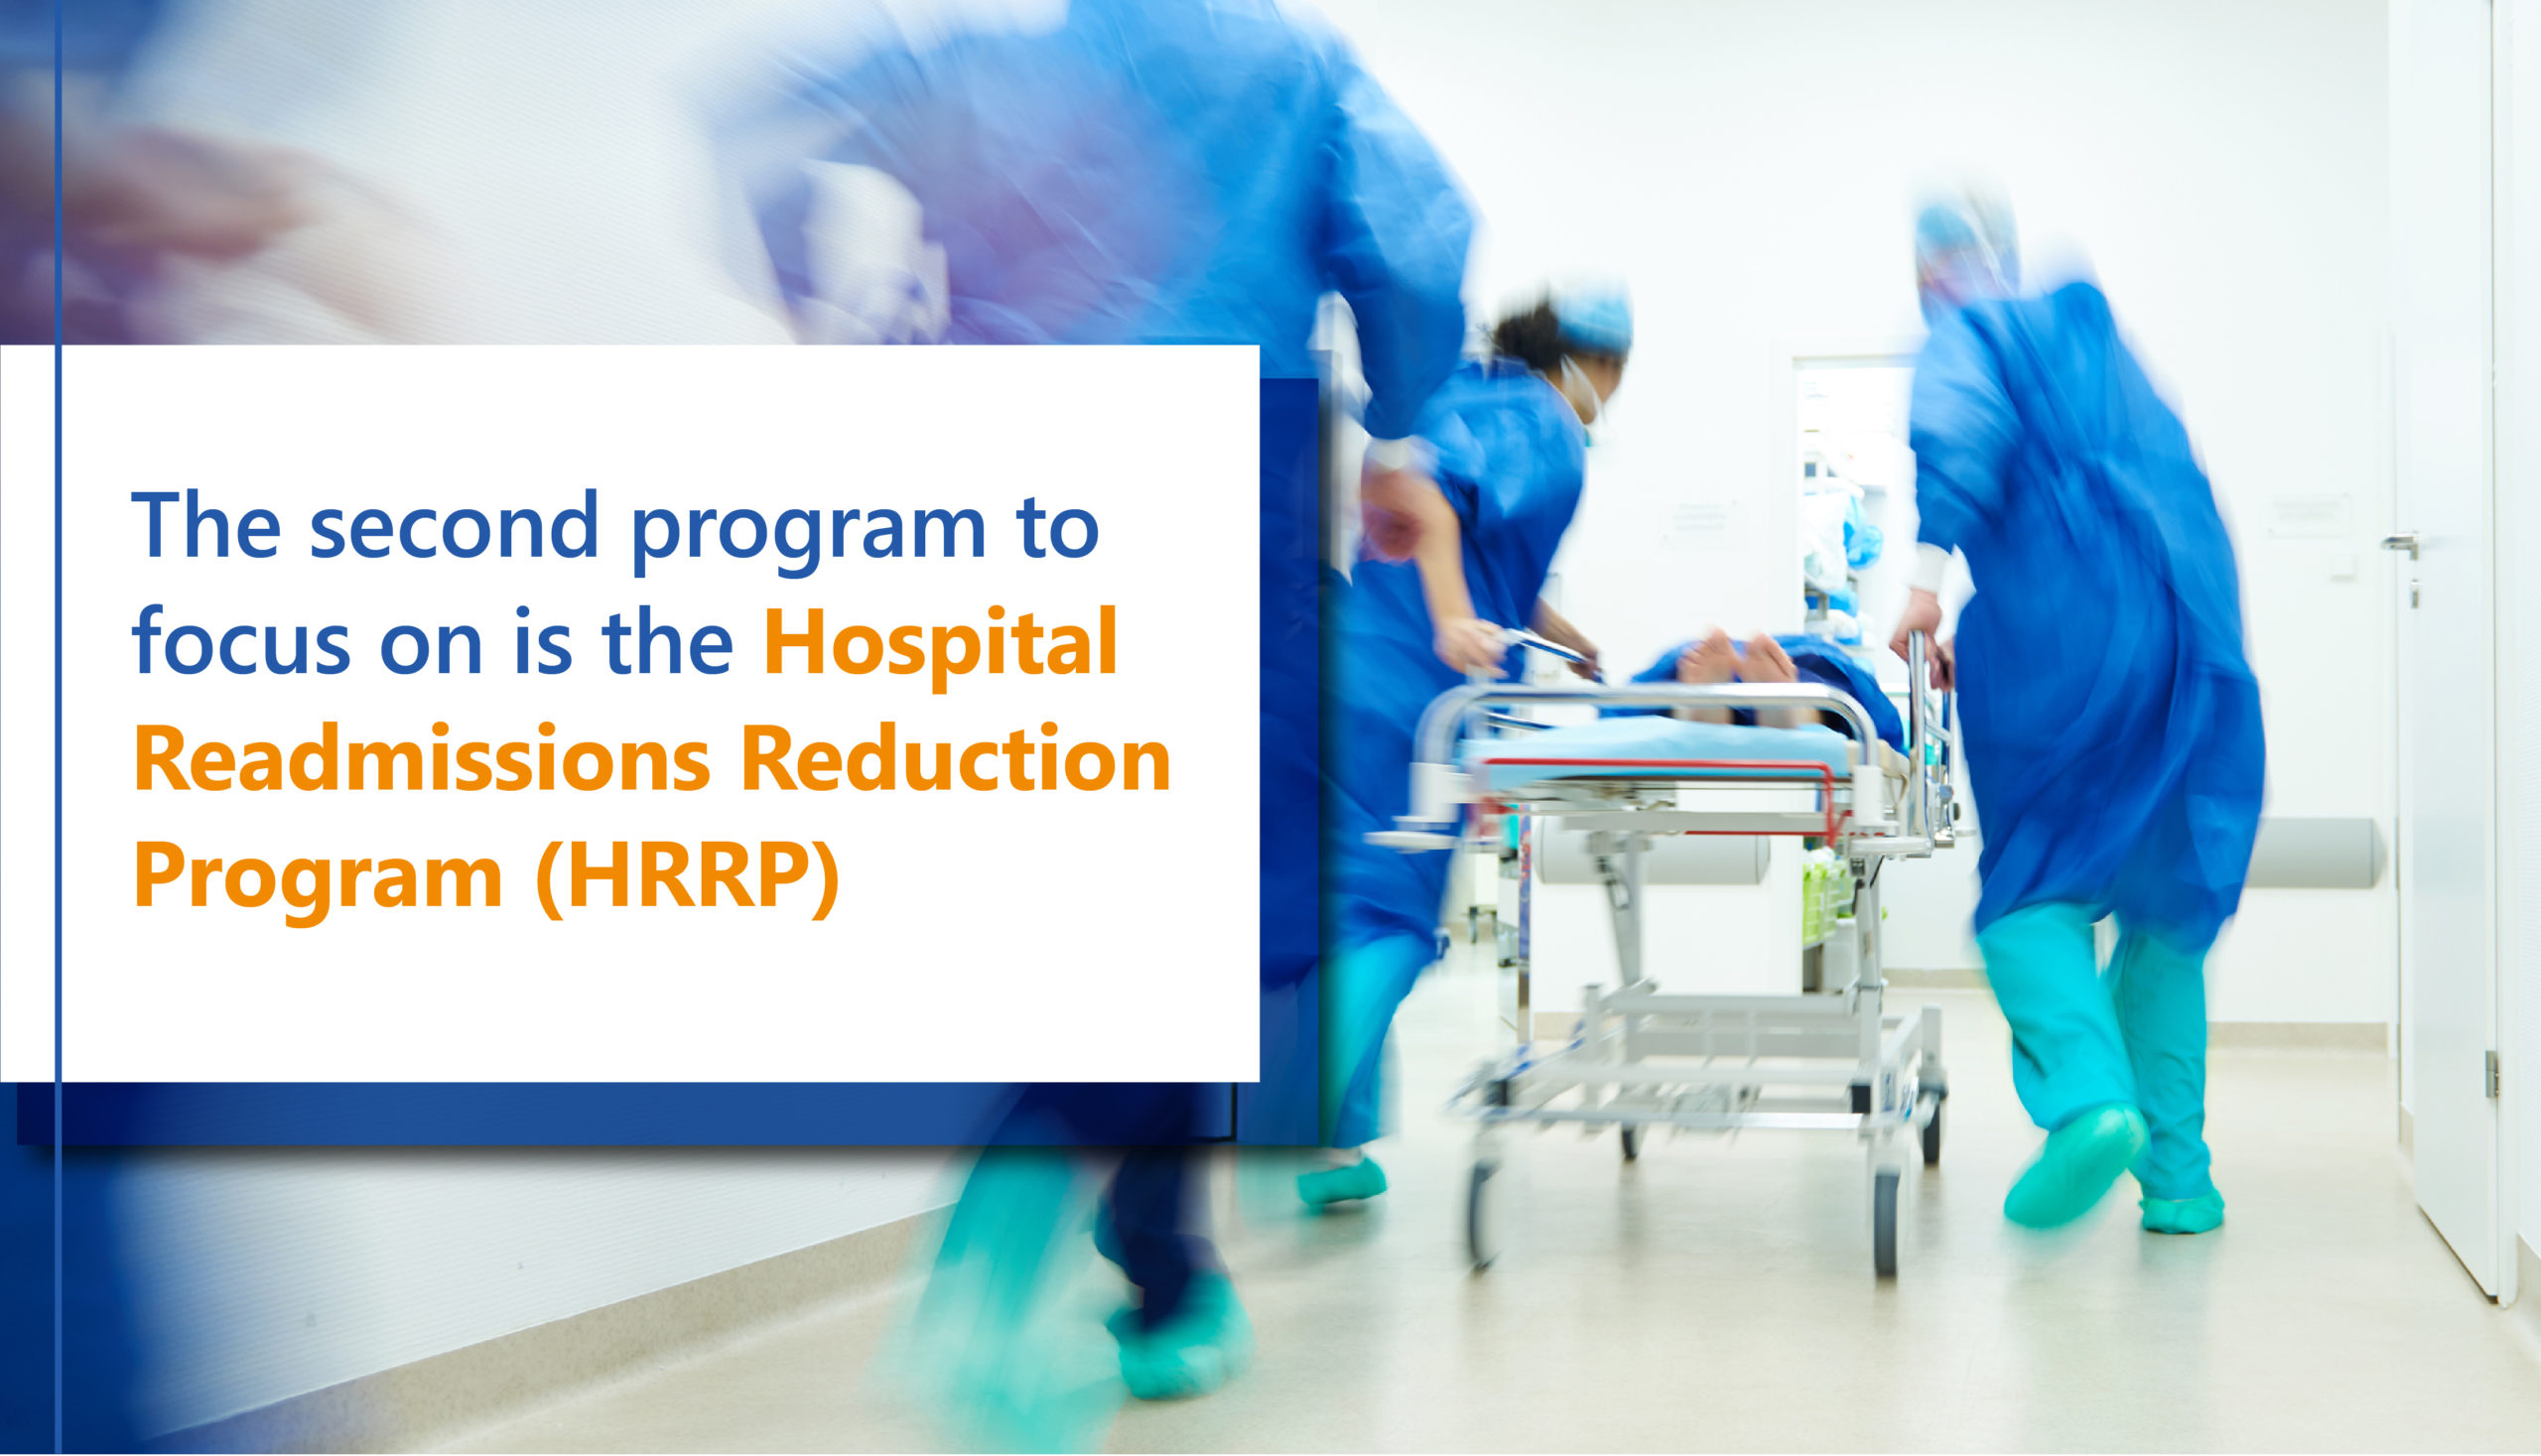 The second program to focus on it the HRRP